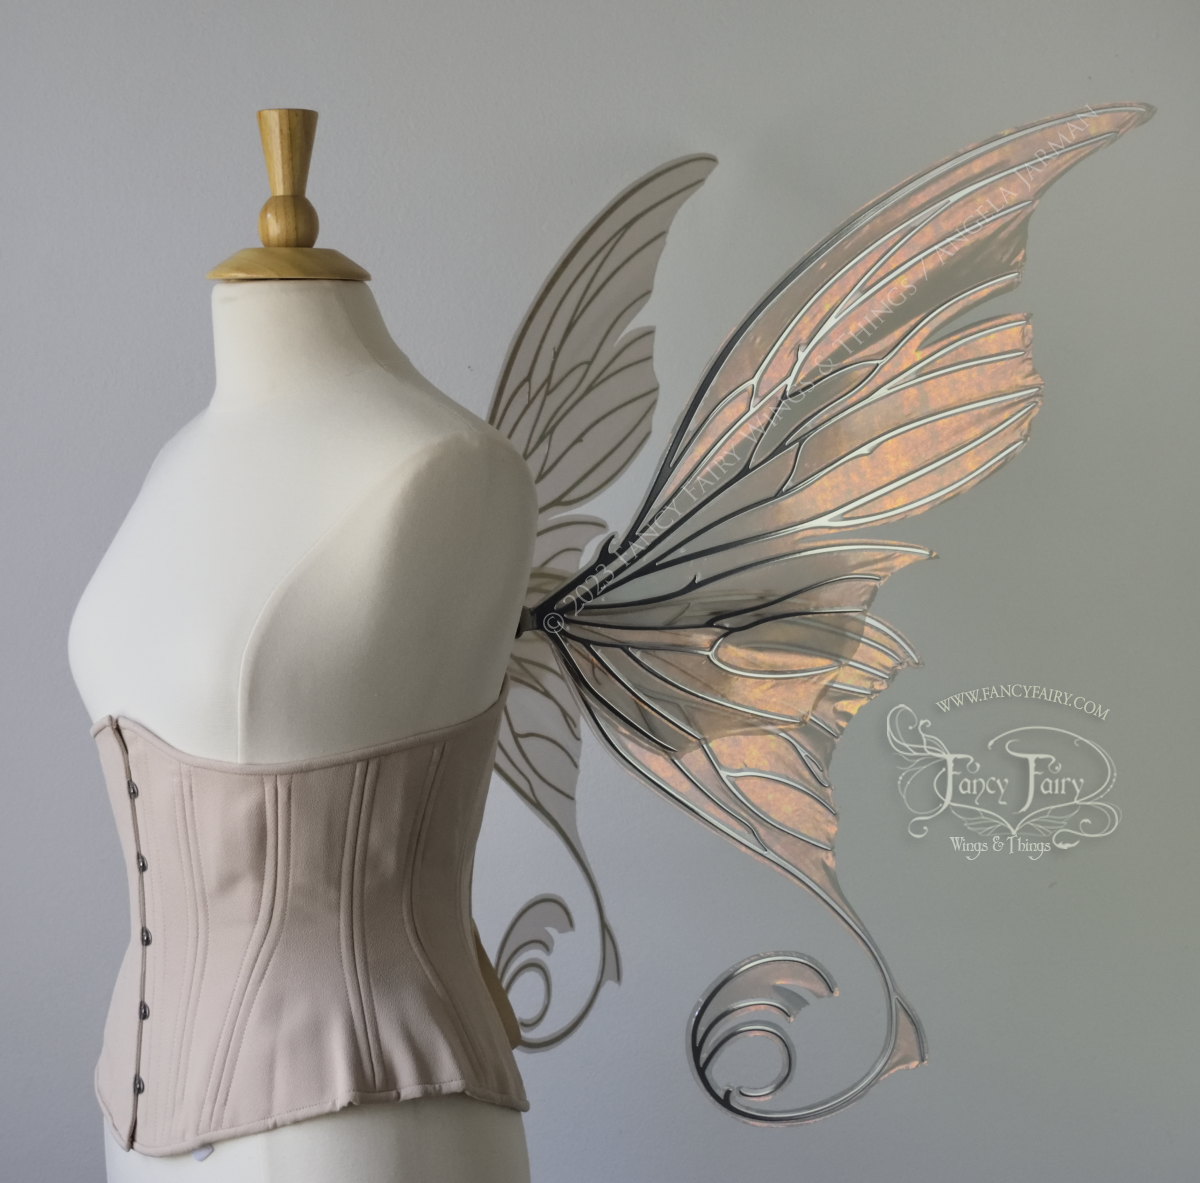 Right side view of an ivory dress form wearing an alabaster underbust corset and large rose gold iridescent fairy wings with lots of intricate silver veins, some have 'thorns'. Upper panels curve slightly downwards along top edge with pointy tips, bottom panels have tails